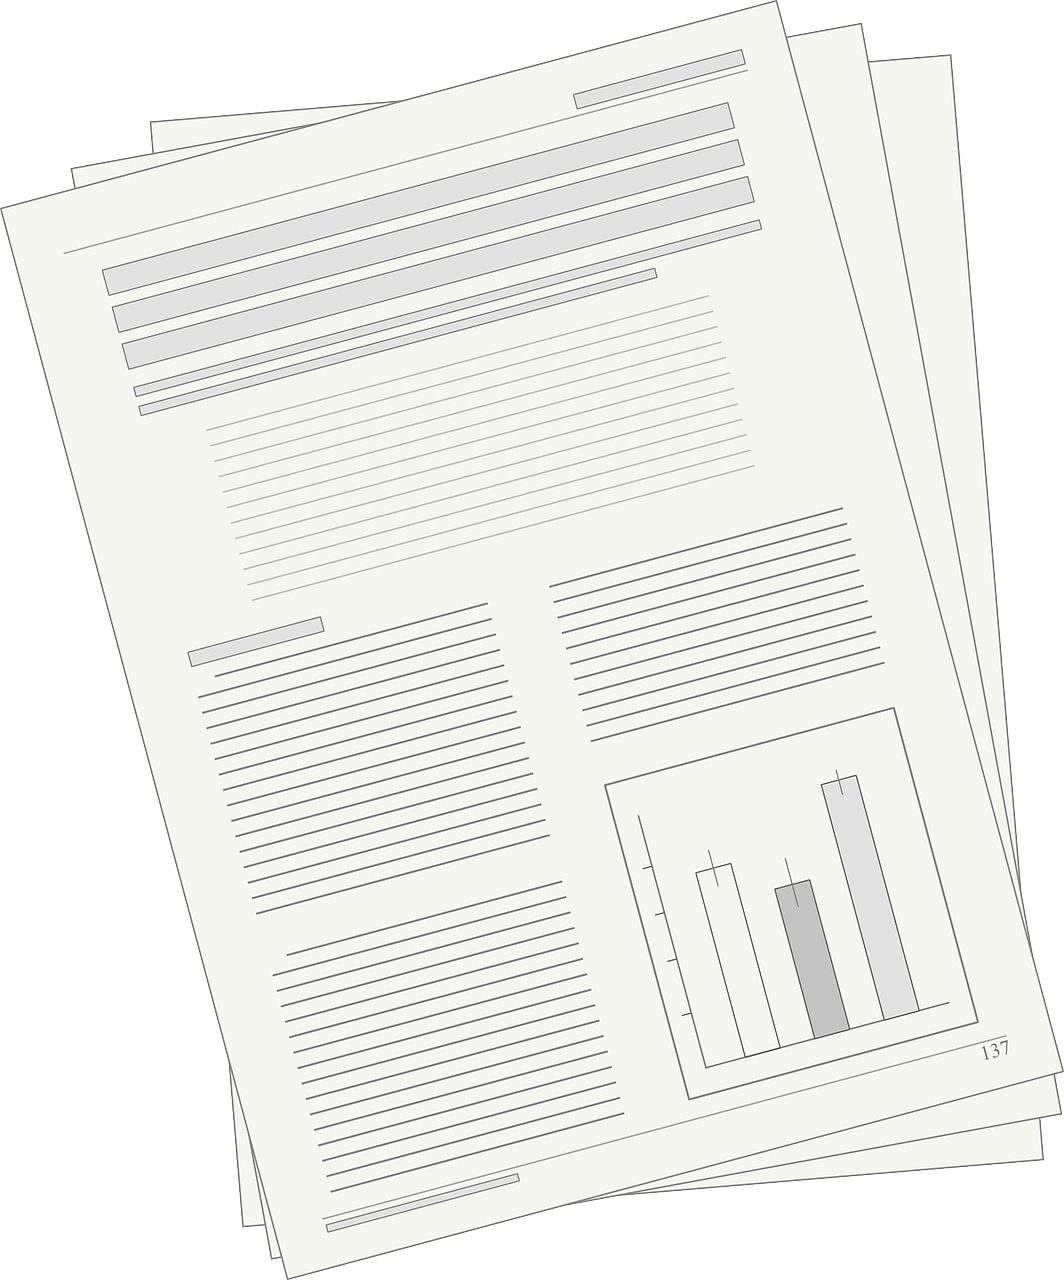 a stack of papers sitting on top of each other, an illustration of, analysis report, clipart, low resolution, simple and clean illustration